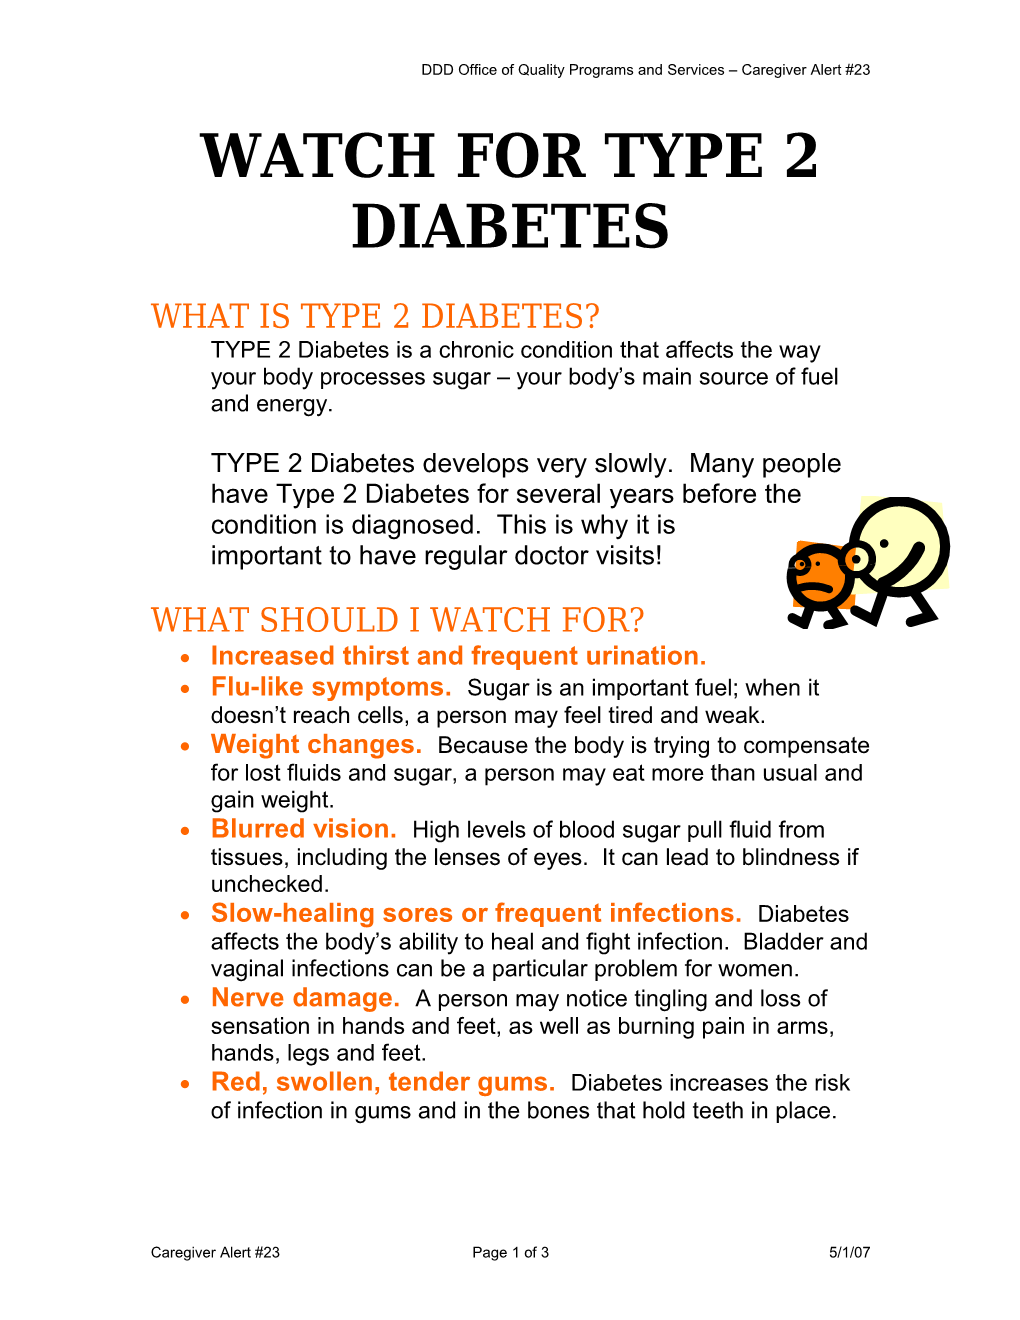 Watch for Type 2 Diabetes